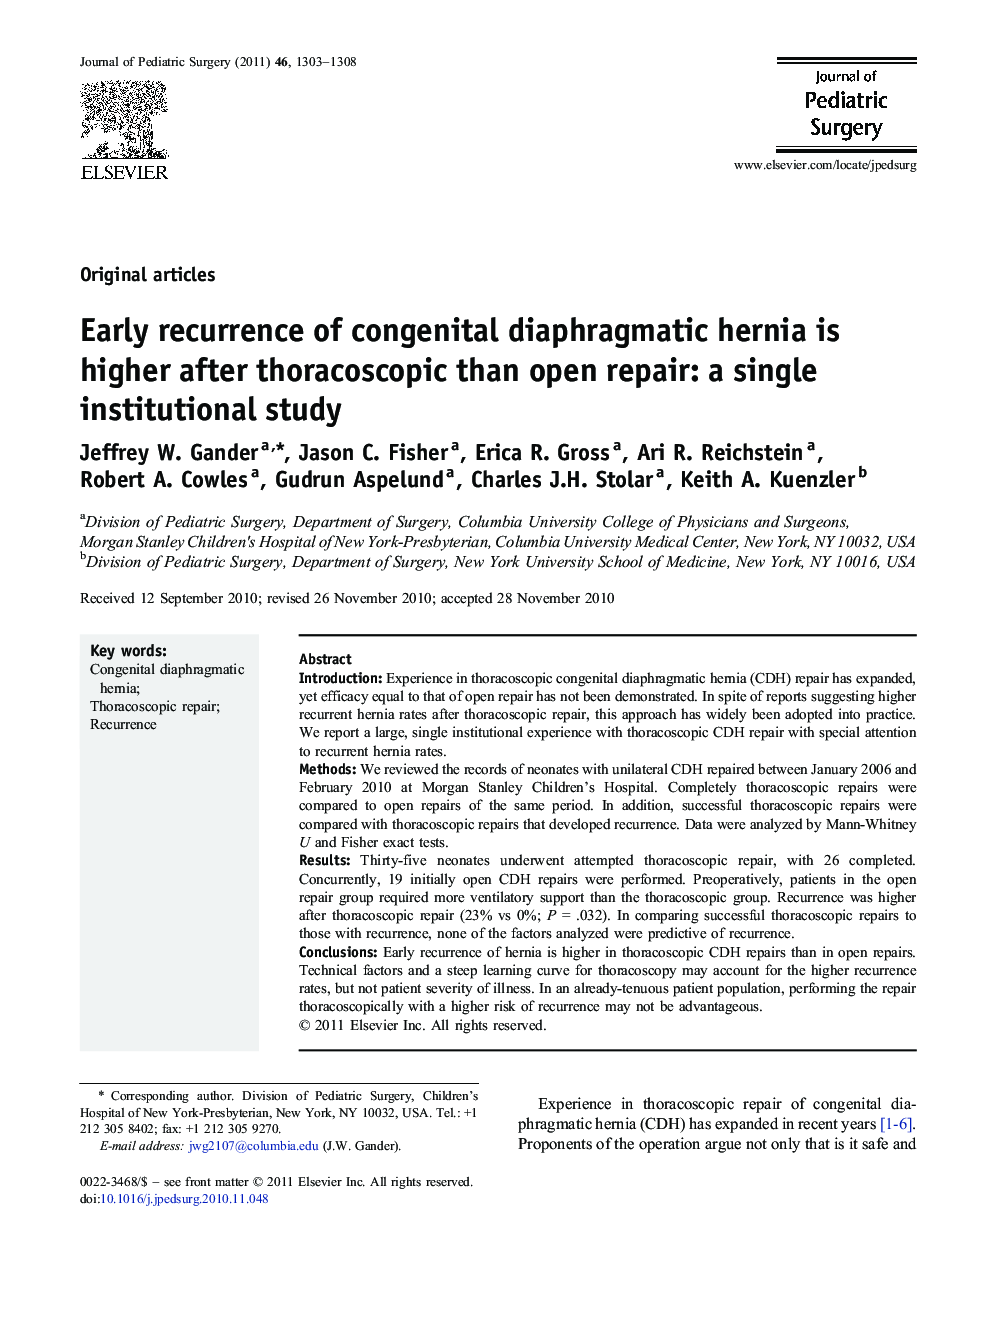 Early recurrence of congenital diaphragmatic hernia is higher after thoracoscopic than open repair: a single institutional study